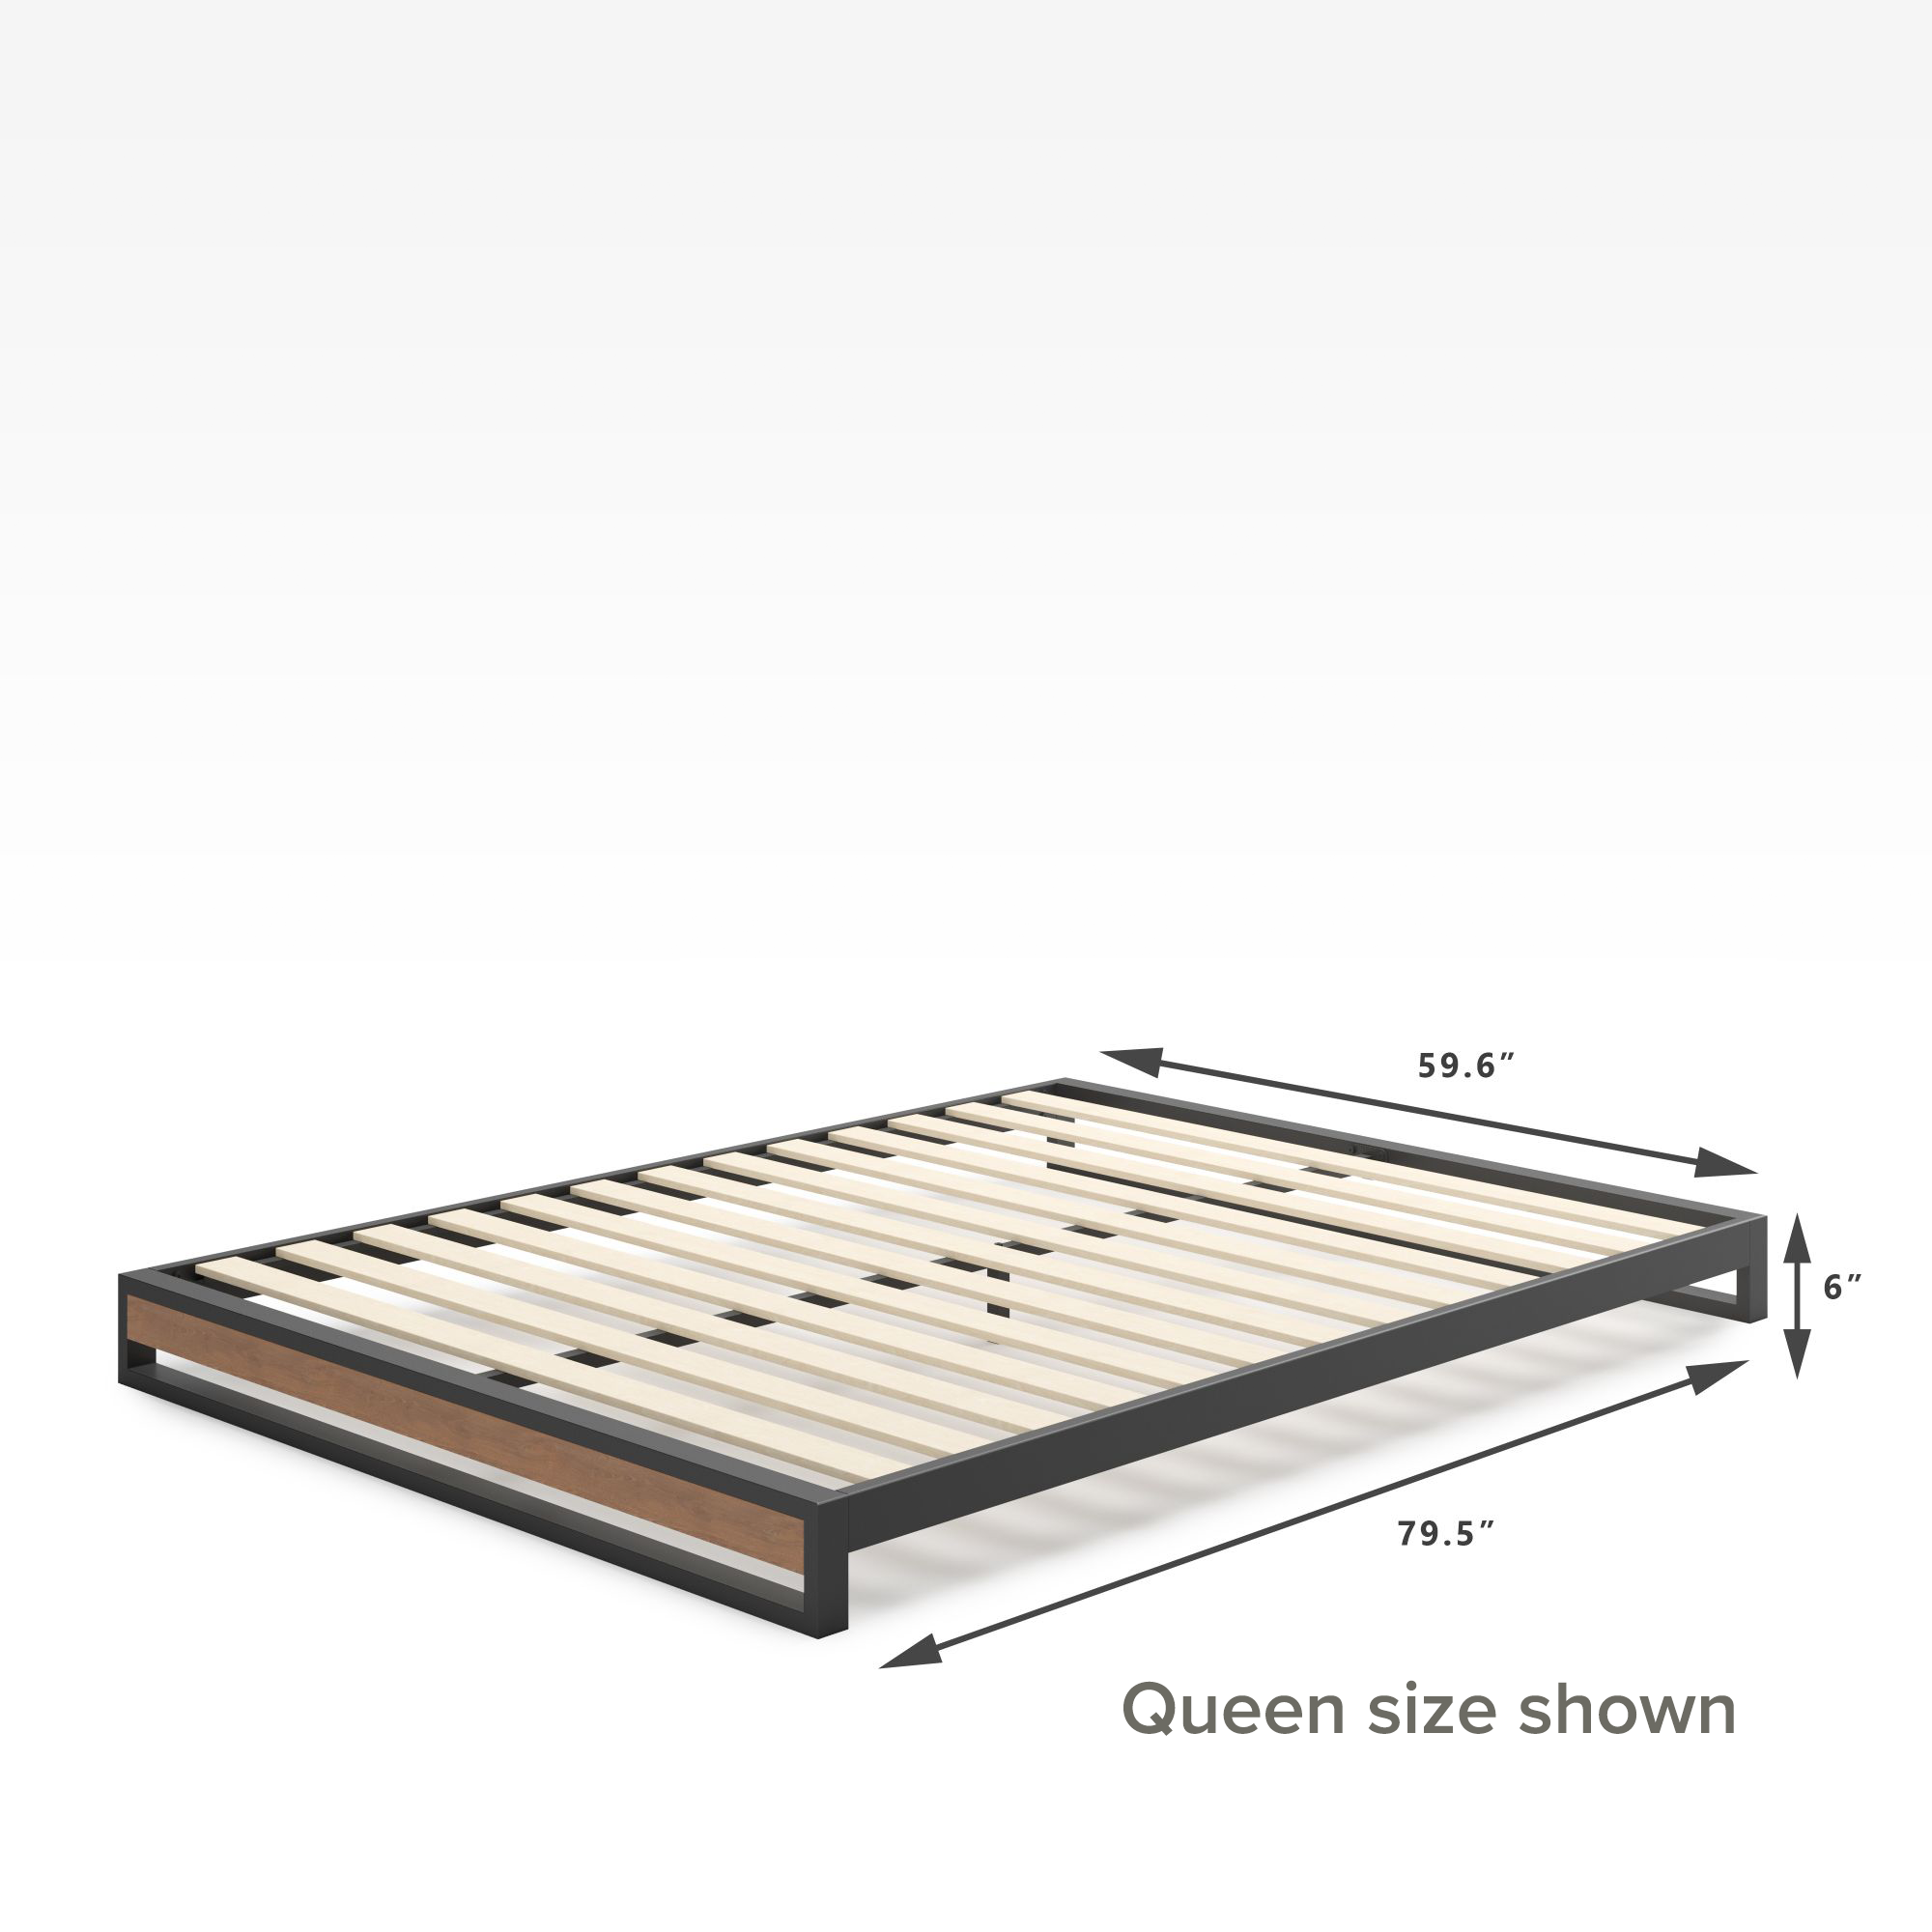 2019 GOOD DESIGN™ Award Winner - Suzanne Metal and Wood Platforma Bed Frame 6 inch Queen Size Dimensions